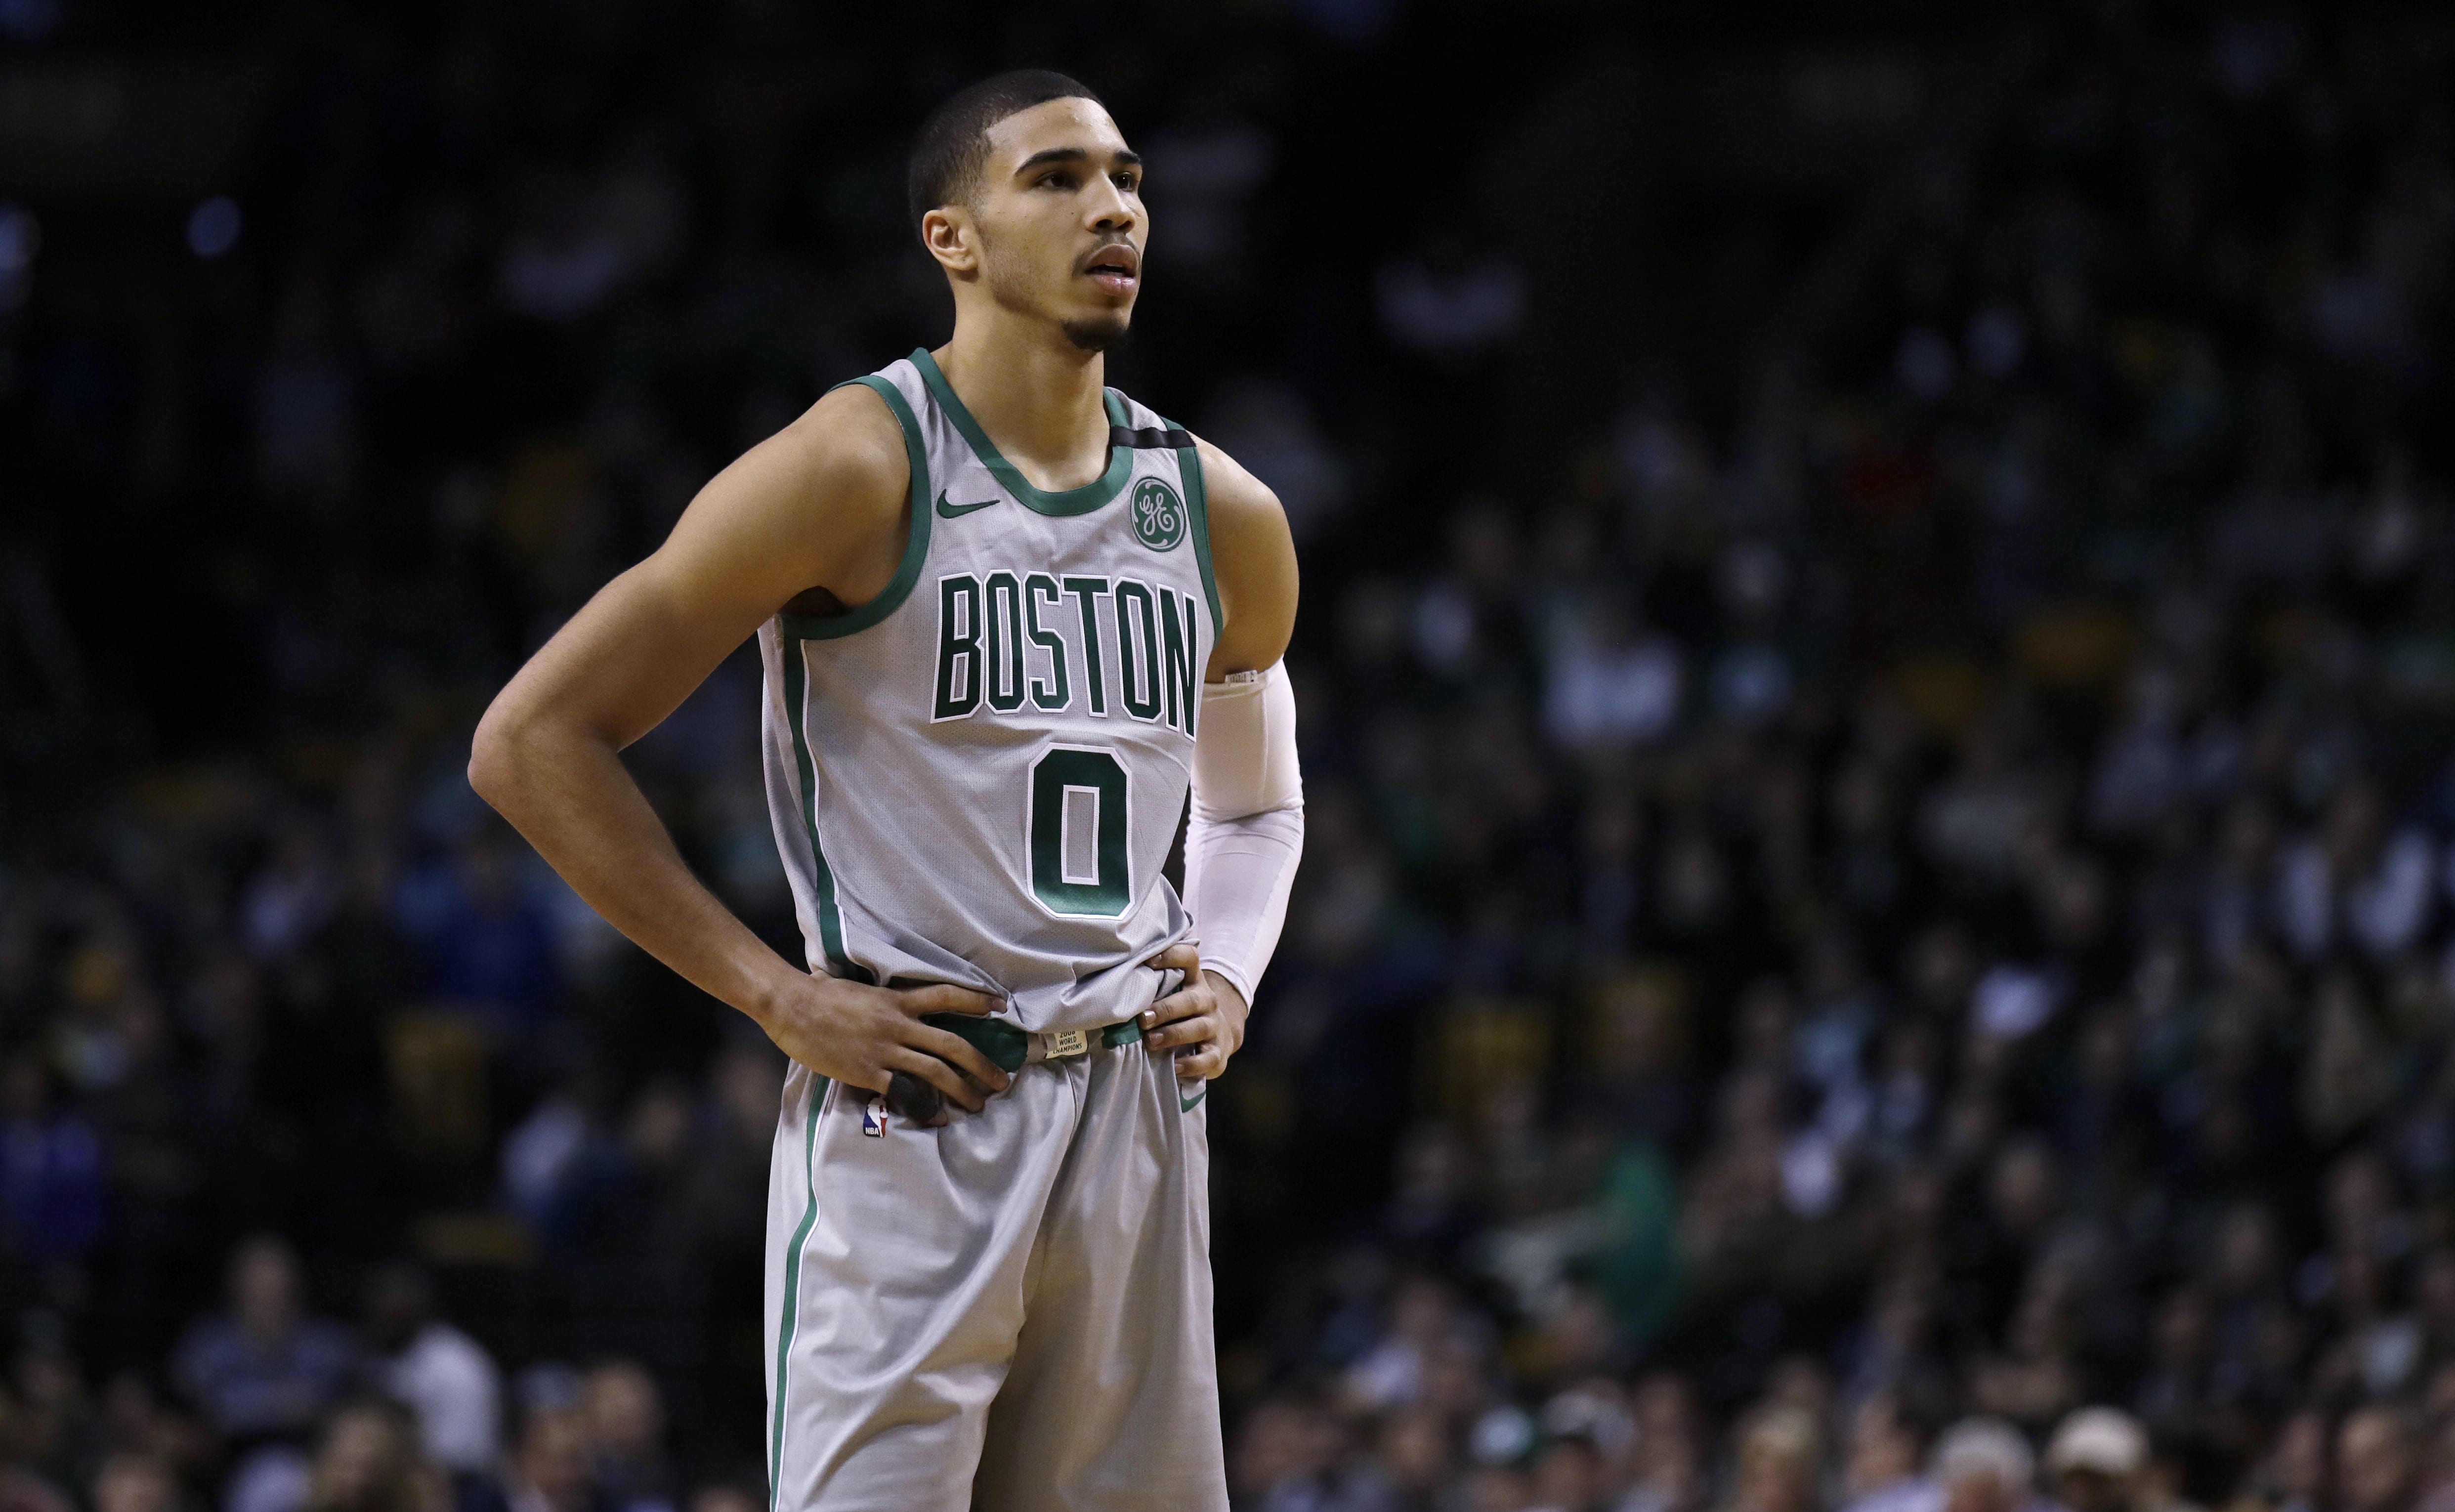 Boston Celtics forward Jayson Tatum (0) during the second half of an NBA basketball game in Boston, Monday, Feb. 26, 2018. The Celtics defeated the Grizzlies 109-96. (AP Photo/Charles Krupa)